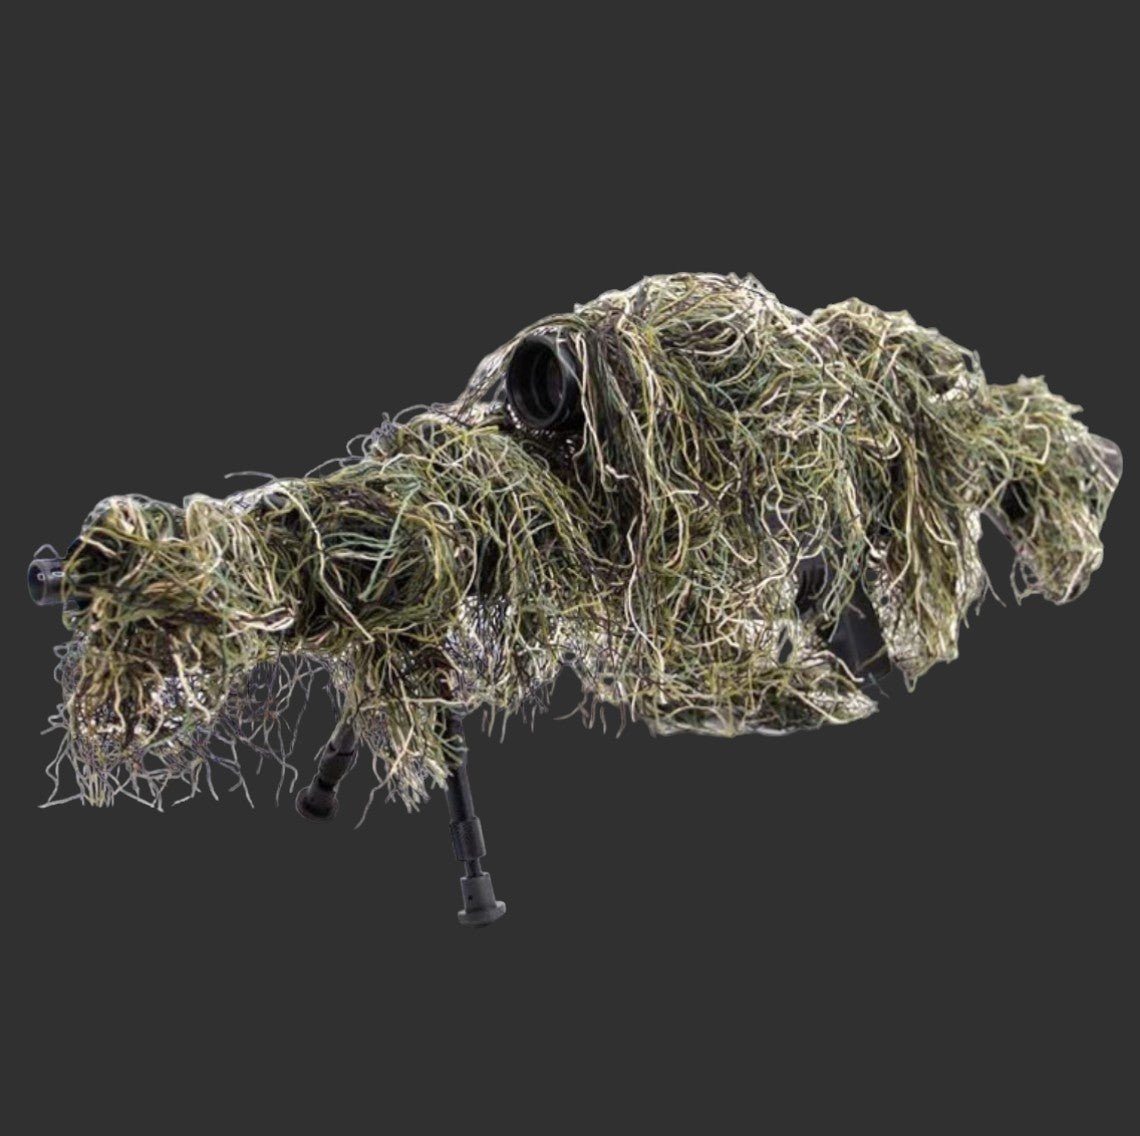 A covered sniper rifle with extensive camouflage netting and grass provides firearm protection, concealing its shape and features against a dark gray background with the StealthGuard Gun Cover by BlasterMasters.